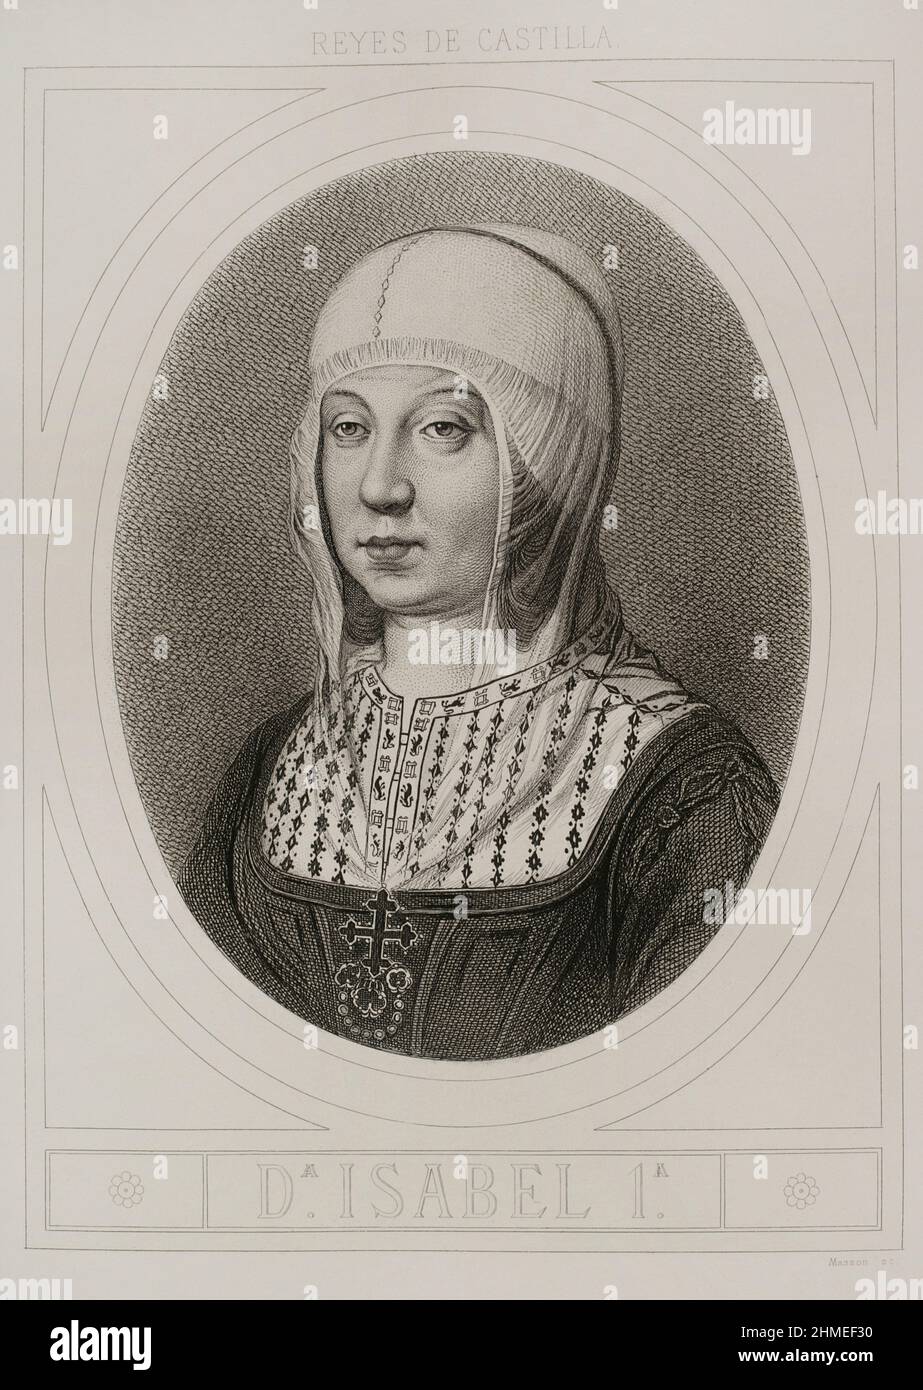 Isabella I (1451-1504). Queen of Castile (1474-1504). Queen consort of Aragon for her marriage to Ferdinand II of Aragon. Portrait. Engraving by Masson. Lithographed by Magín Pujadas. Historia General de España, by Modesto Lafuente. Volume II. Published in Barcelona, 1879. Stock Photo